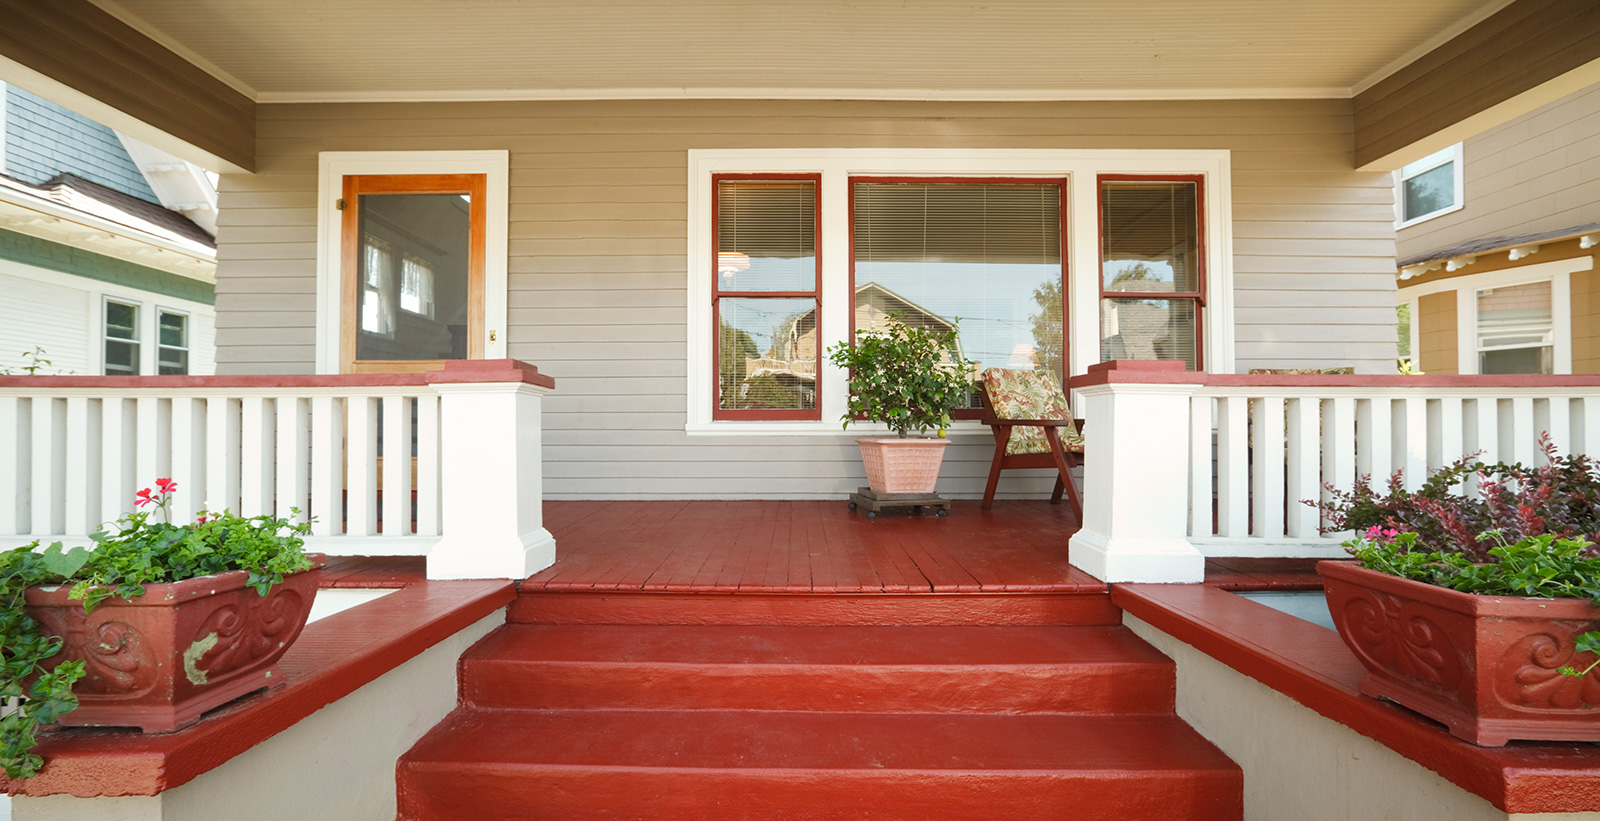 Inspirational house porch with red stairs, red flooring, white fencing, neutral walls, red planters and white trim.